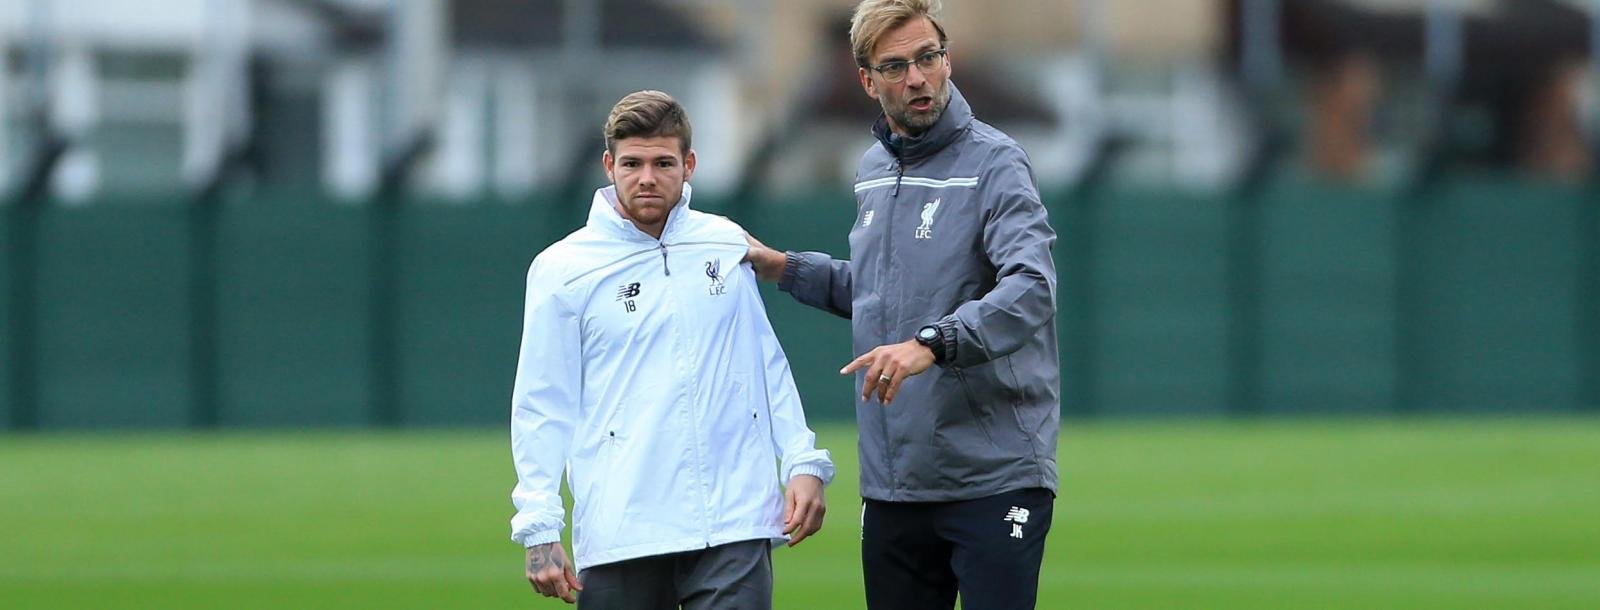 Attack-minded Moreno looks solid at the back under Klopp